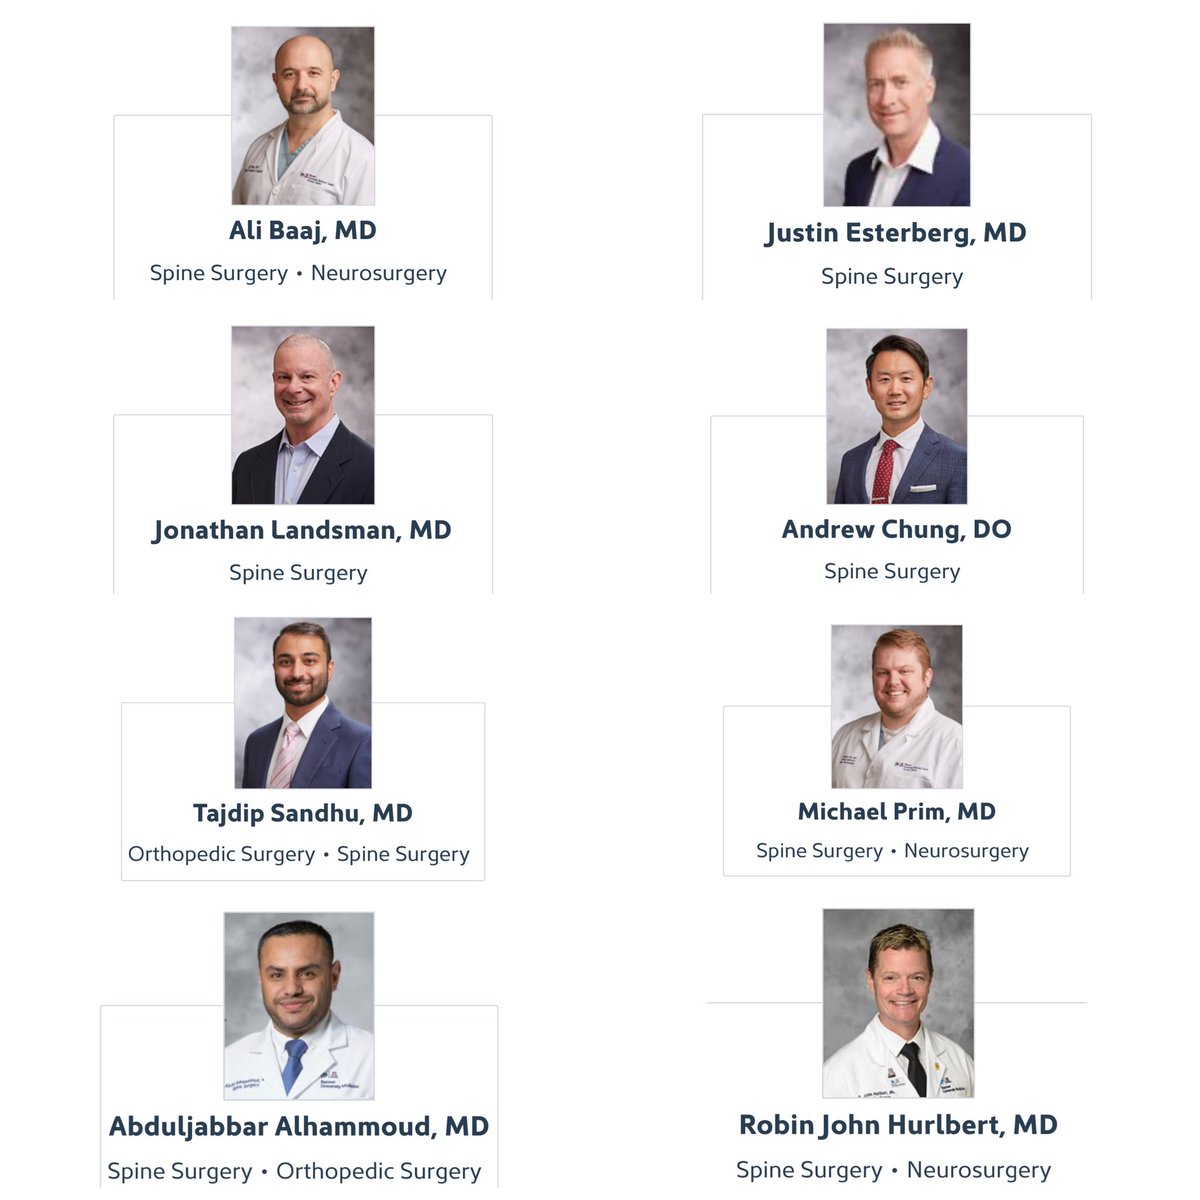 Happy National Doctors Day to my spine-dedicated colleagues in neurosurgery and orthopedic surgery across our #Banner system in #Arizona! Together we’re ensuring that the largest health system in the state is also the BEST one for the delivery of evidence-based,…